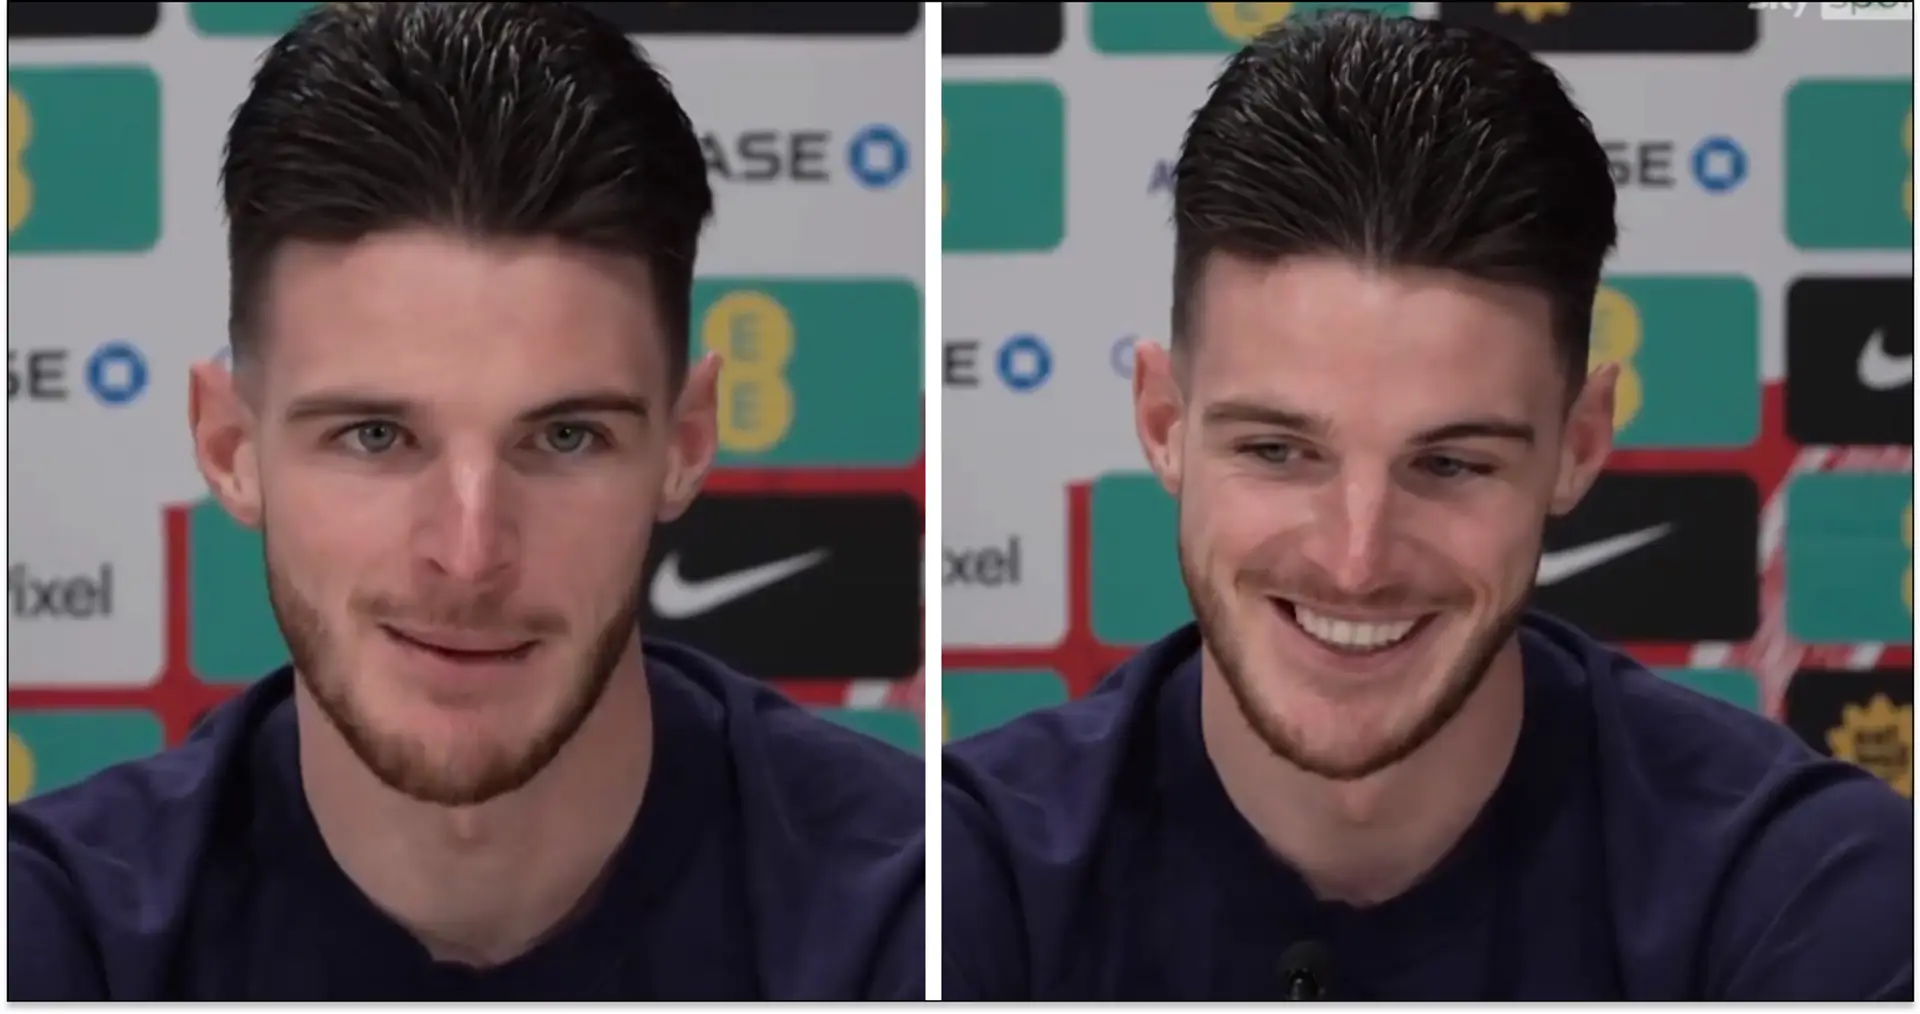 Declan Rice to captain England v Belgium as he reaches milestone: 'You can see by my face... I'm speechless'